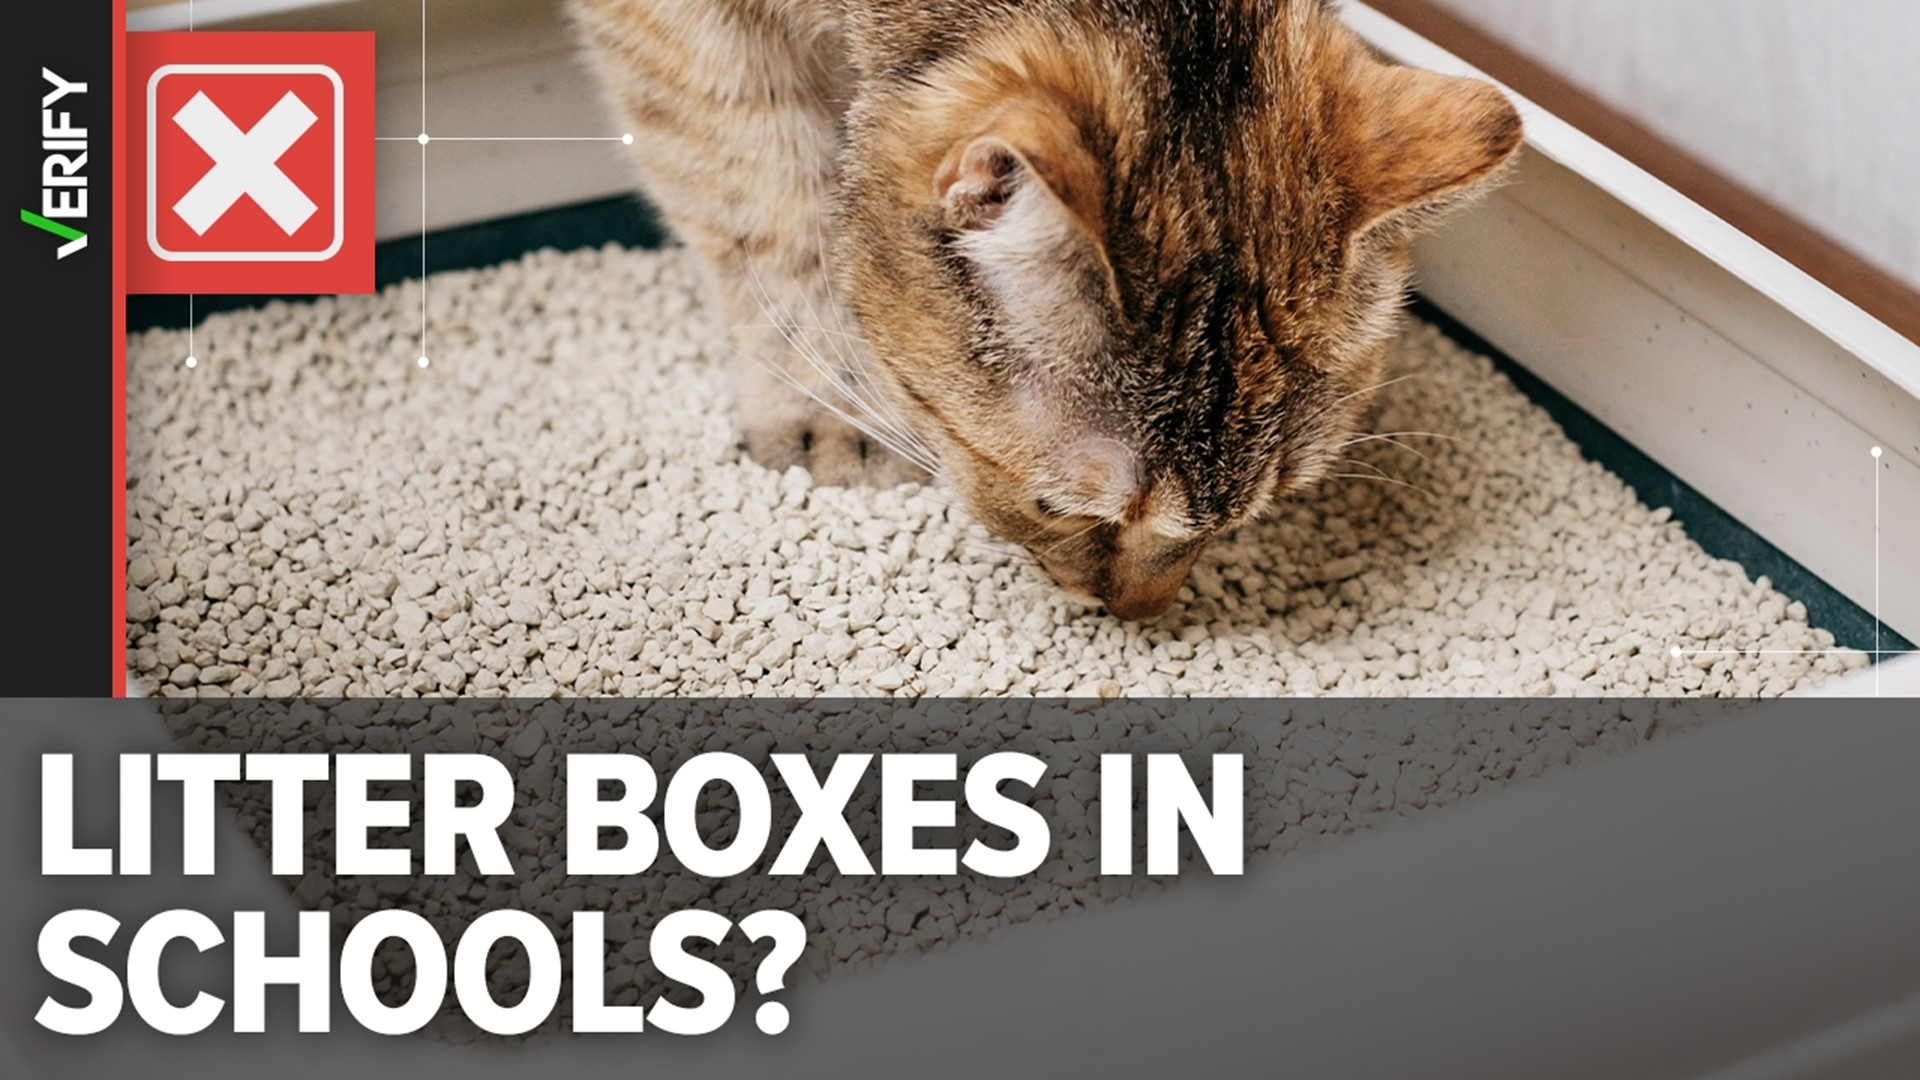 There has never been evidence that a school or school district has provided kitty litter for students “identifying as cats.” We VERIFY the origins of the rumor.